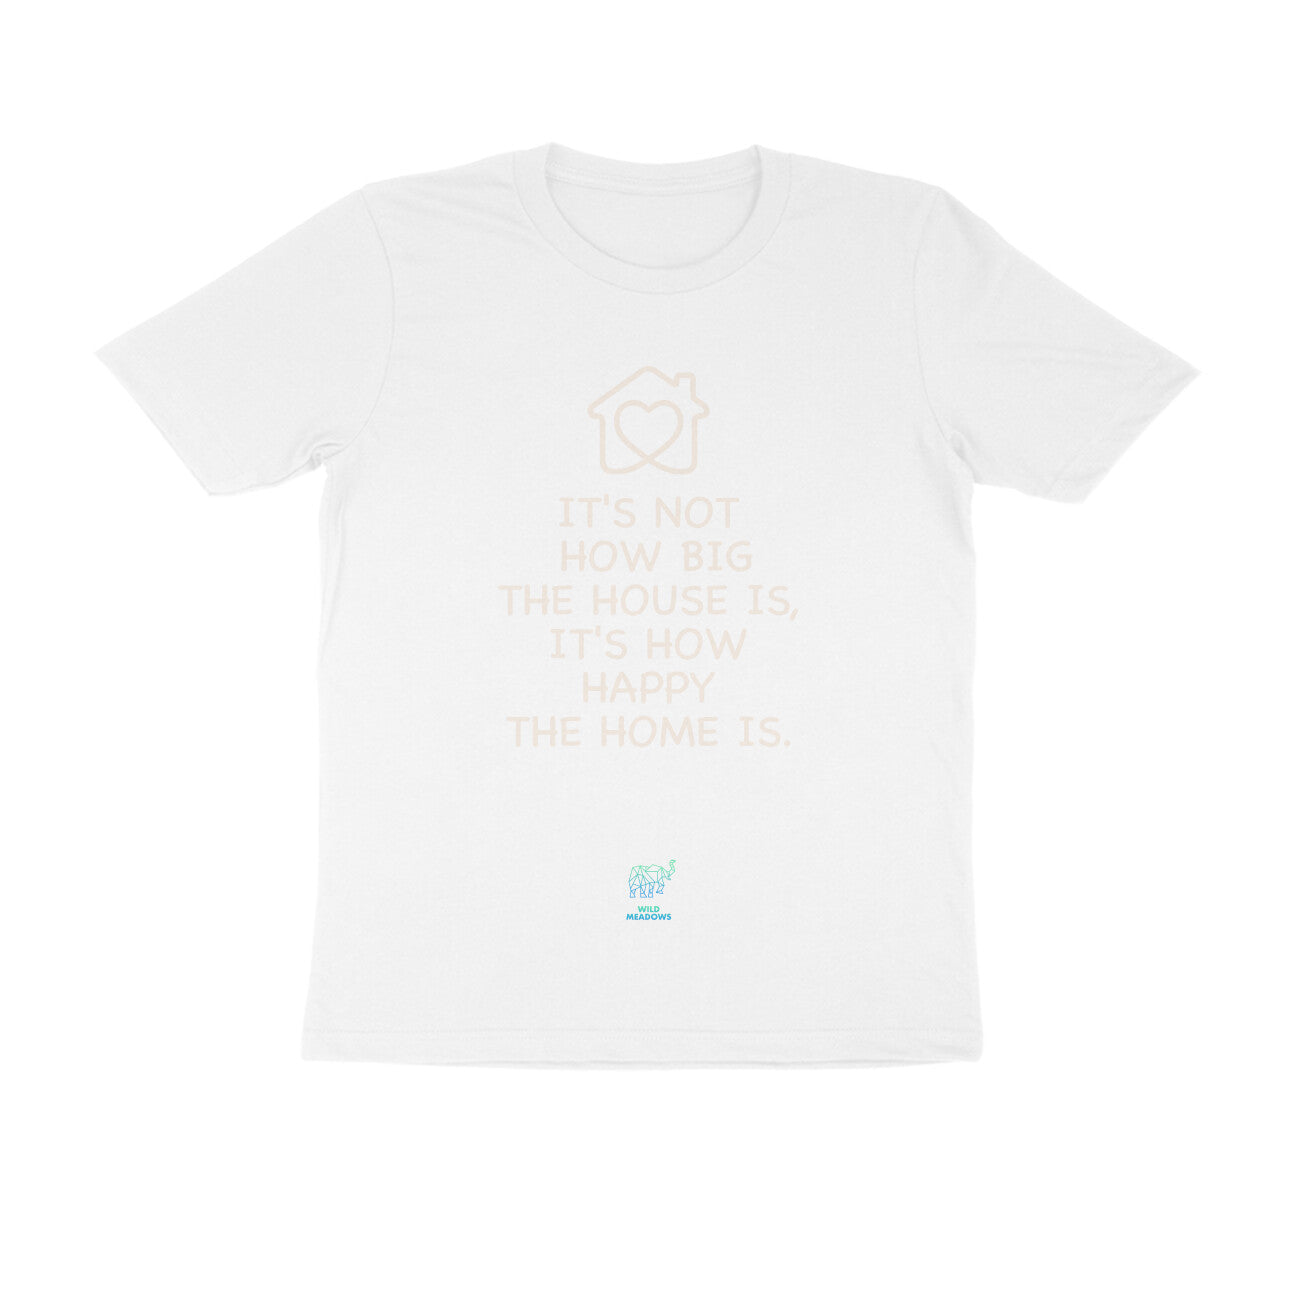 Gospel ( It's not how big the house is, it's how happy the home is )-Unisex Tees